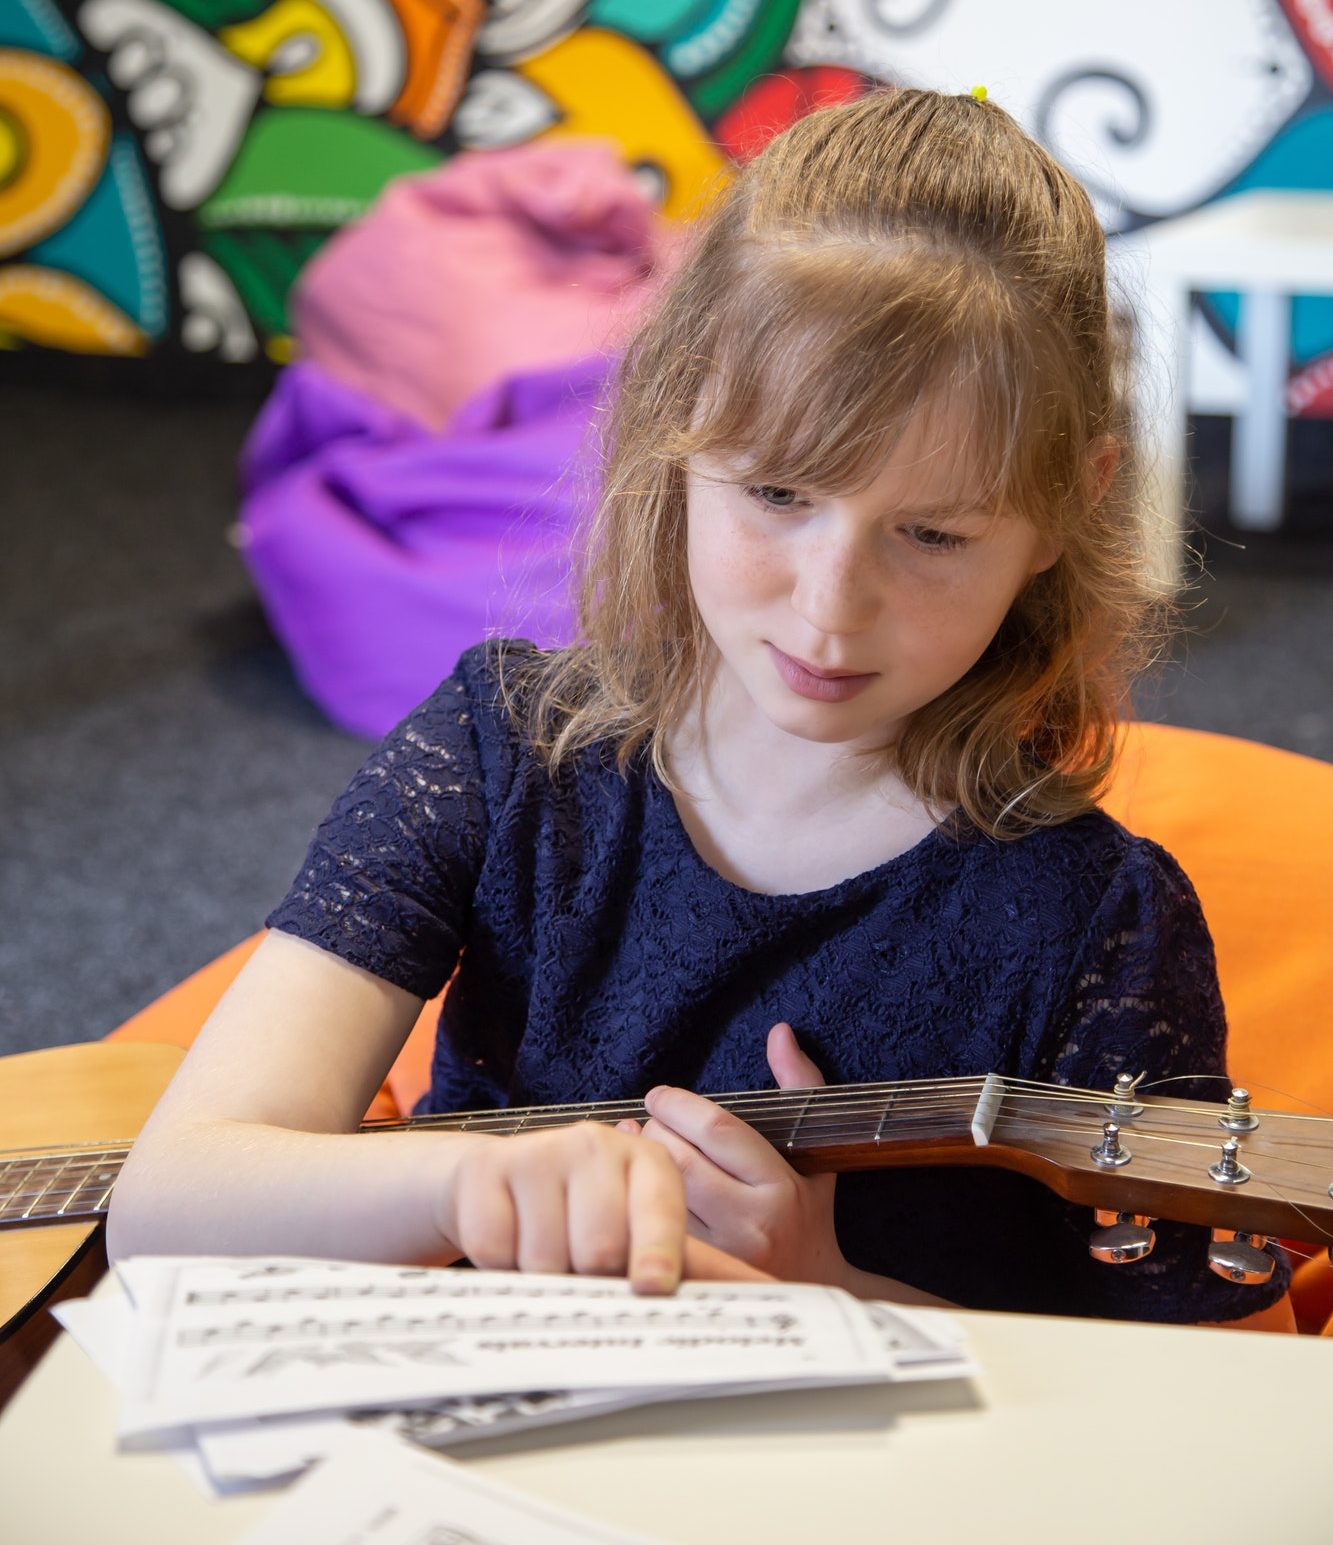 A little girl learns to play the guitar by sheet music.